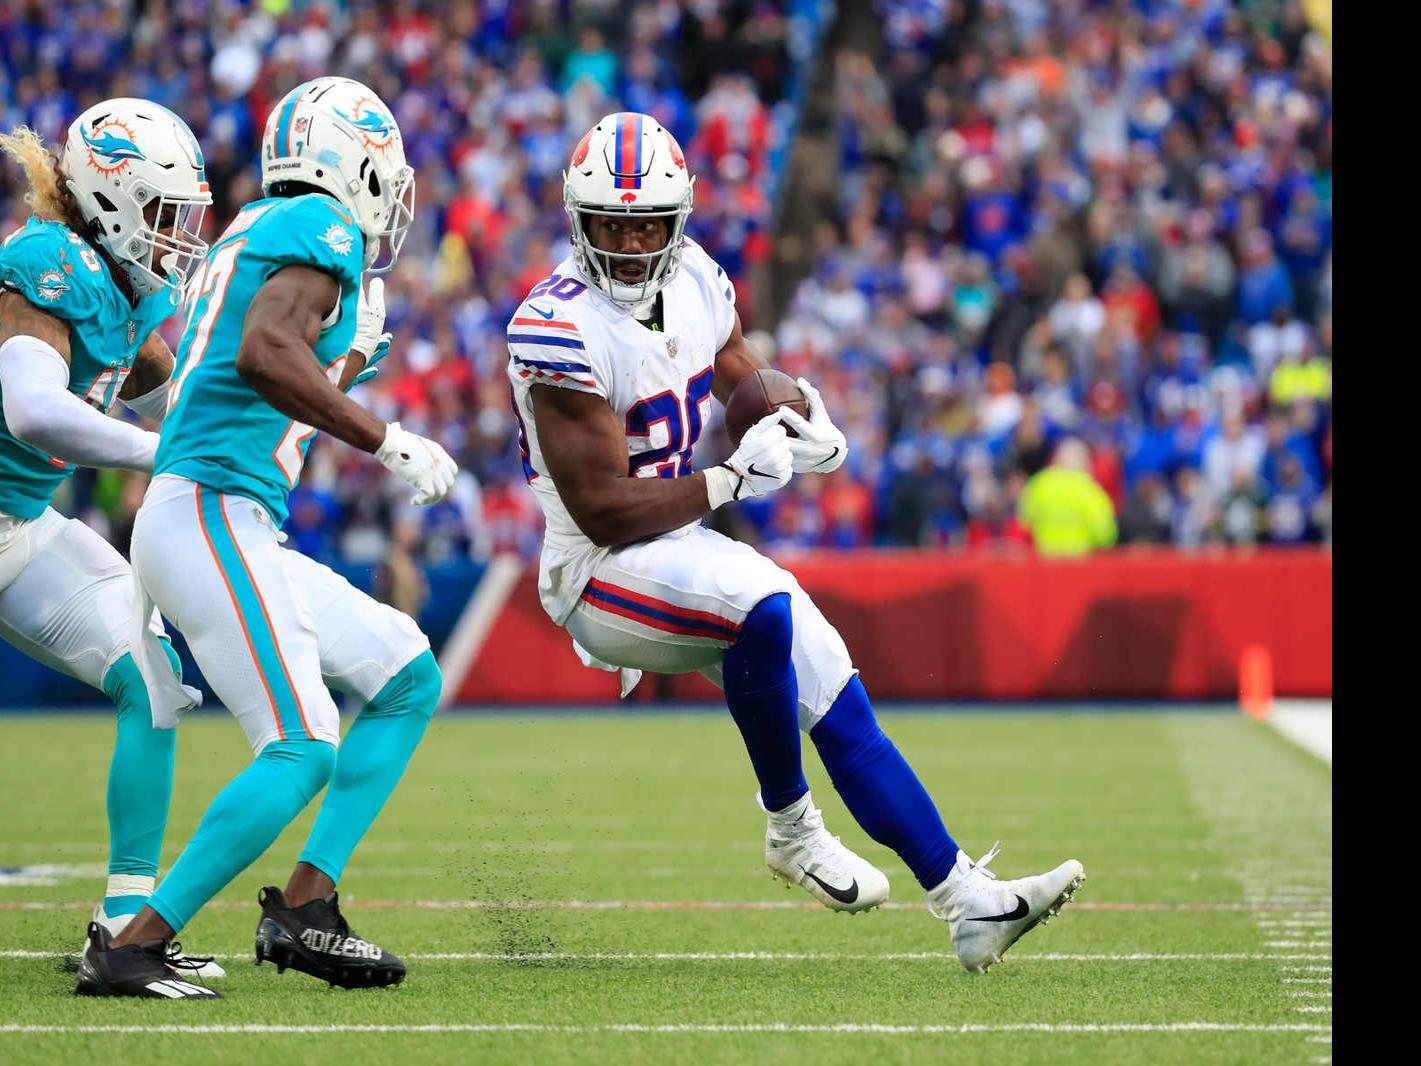 Scouting report: Advanced stats show just how much running backs are struggling | Buffalo Bills News | NFL | buffalonews.com